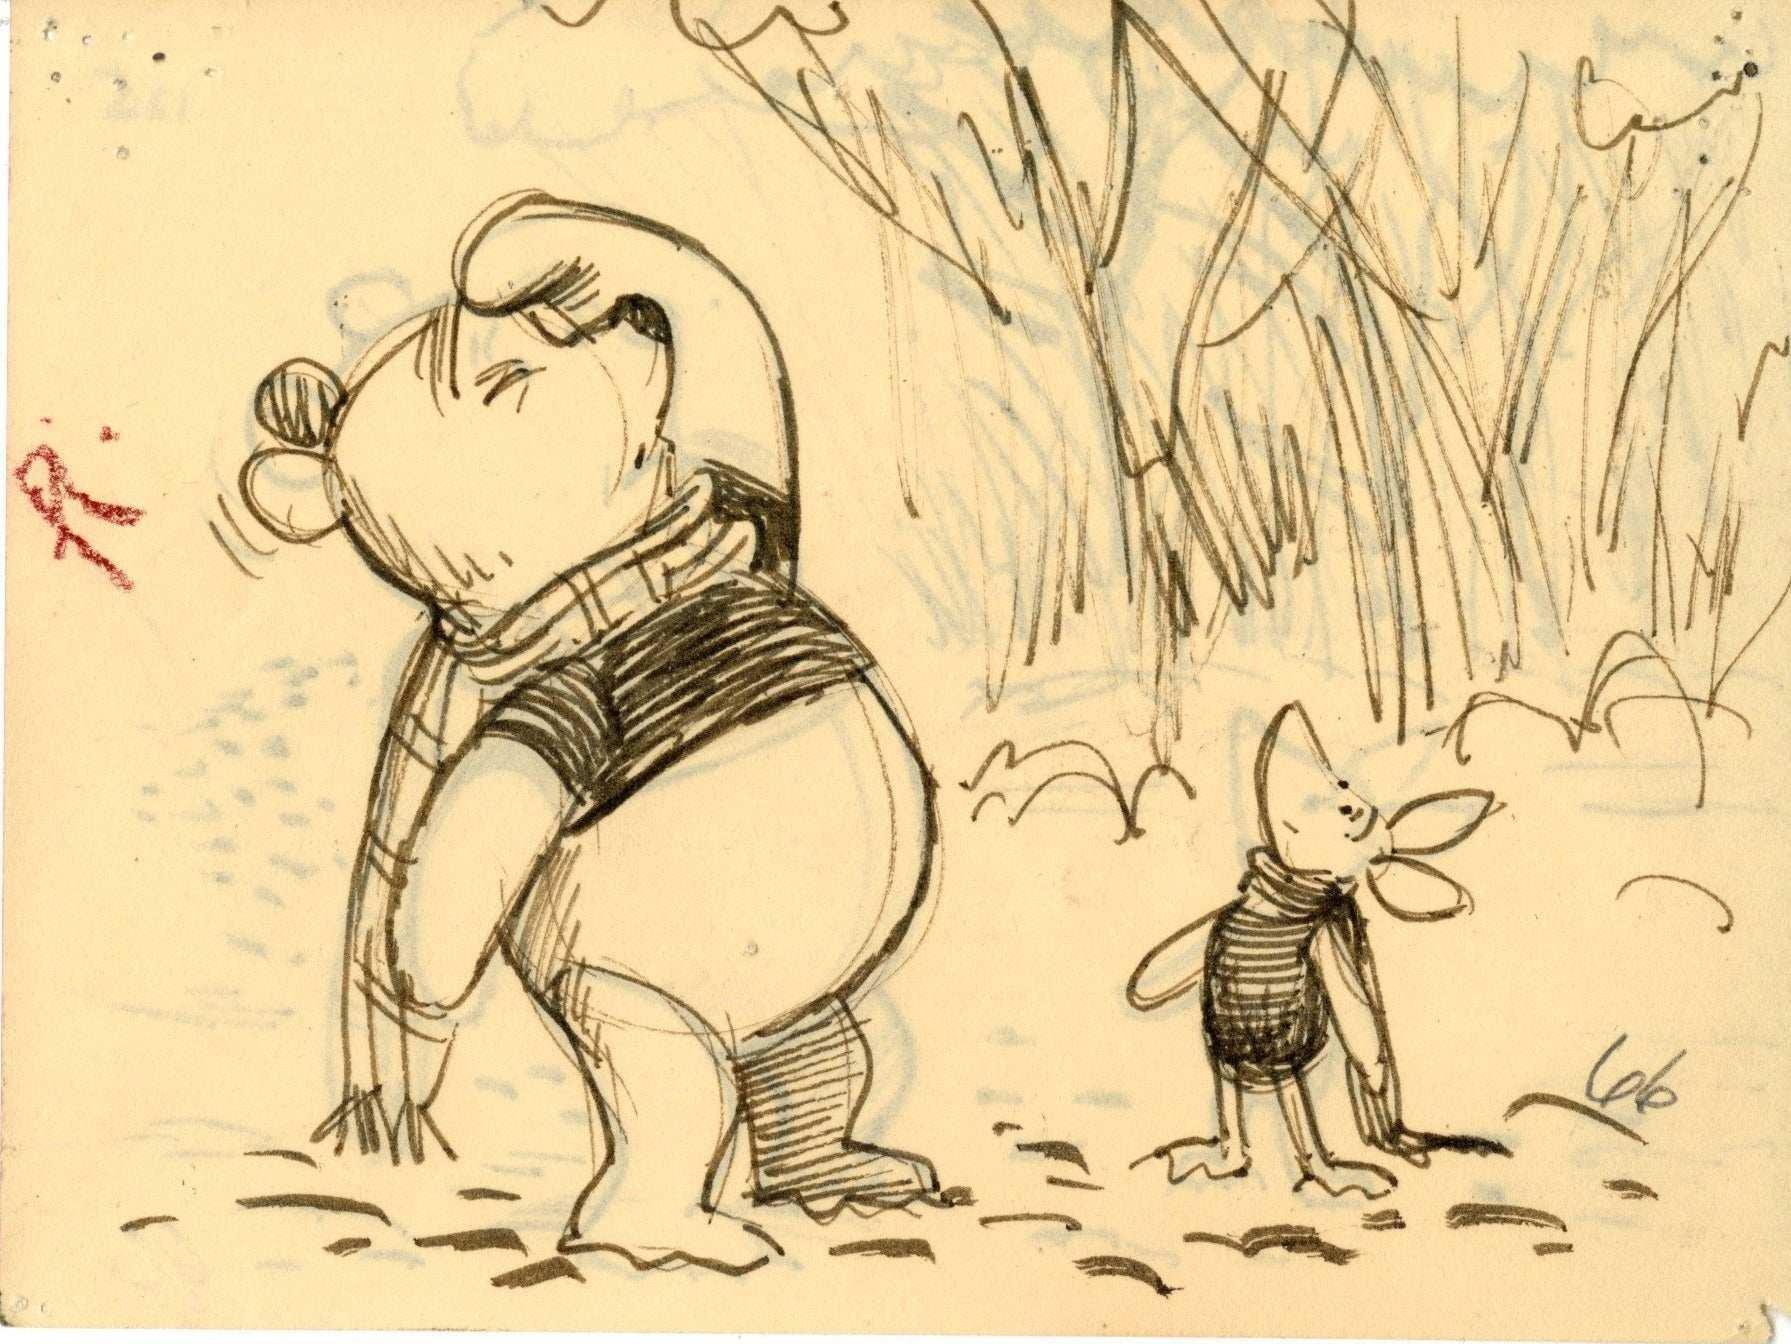 Winnie the Pooh and Tigger Too, Original Storyboard: Pooh and Piglet - Art by Walt Disney Studio Artists